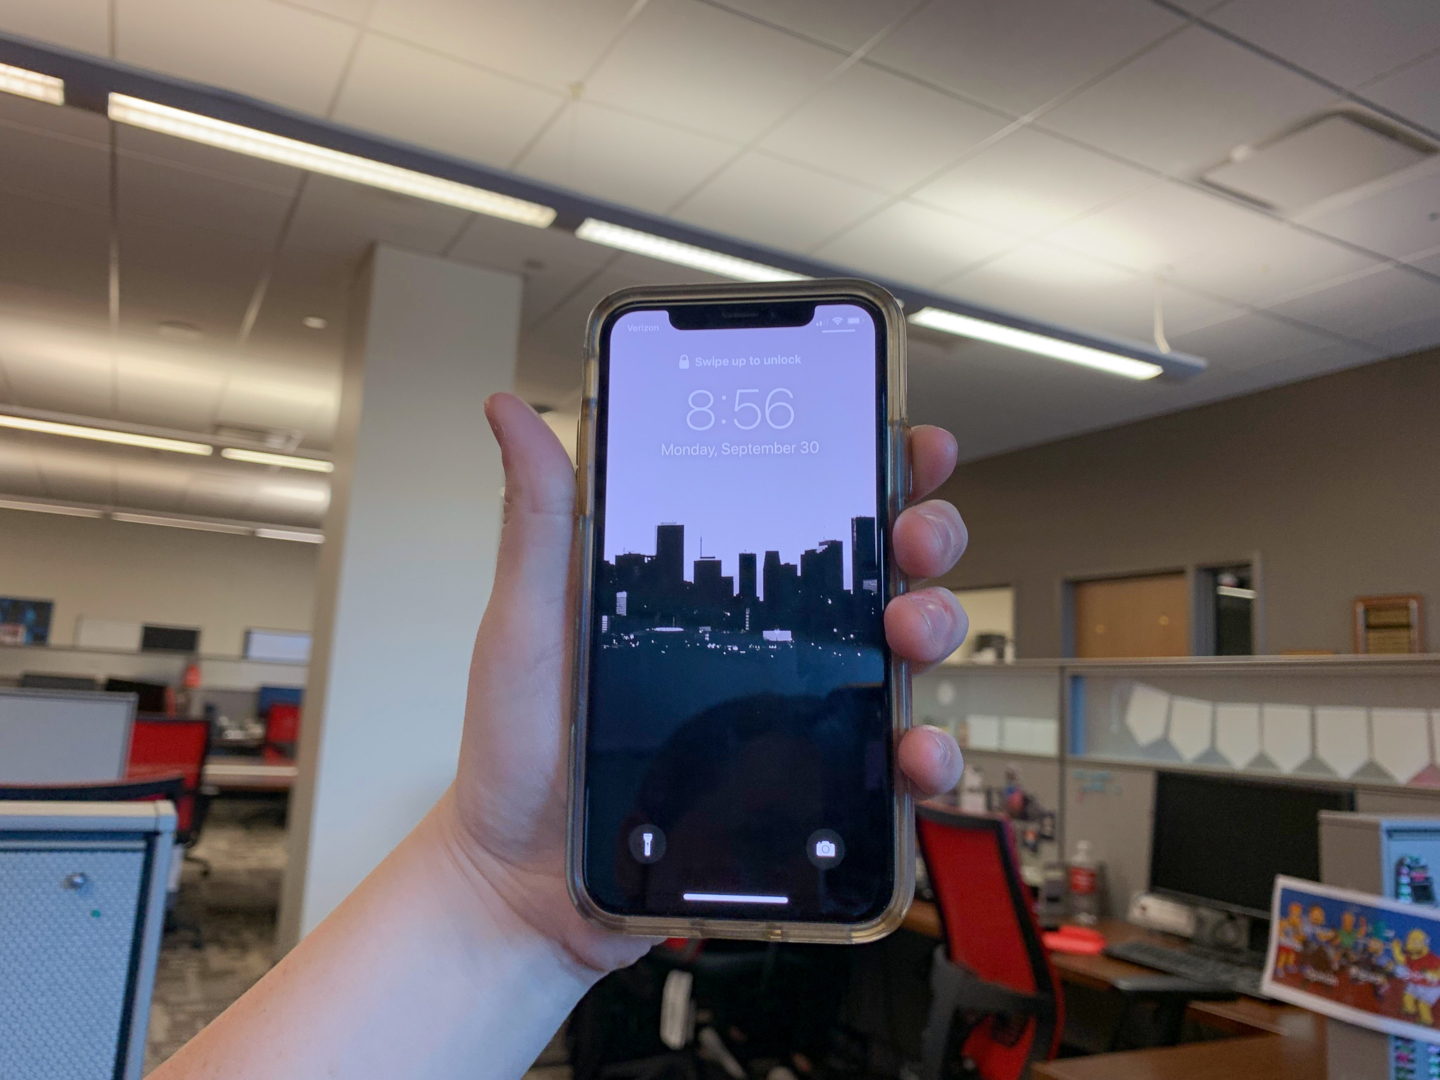 Apple recently released new iPhones, but older iPhones should not have to have a hard time repairing their phones. |Trevor Nolley/ The Cougar